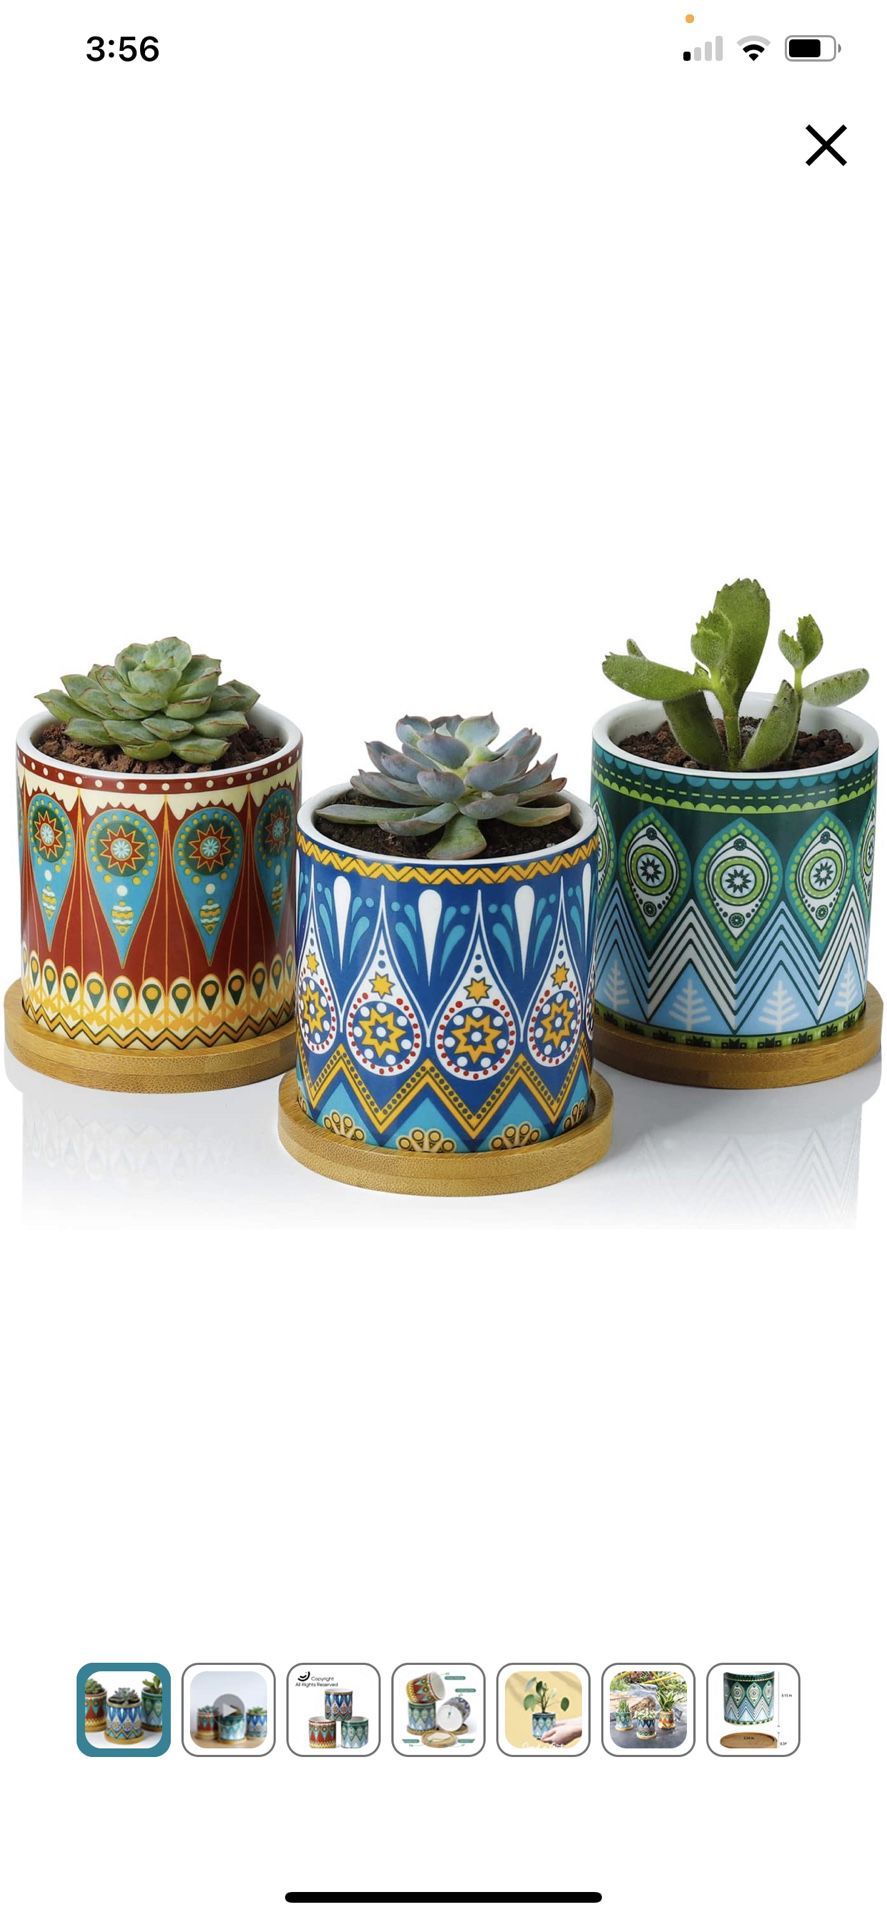 Succulent Planter Pots-3 Inch Small Ceramic Planters Plants Pots Mini Flower Vase with Bamboo Tray and Drainage Hole for Indoor Plants, Colorful Manda